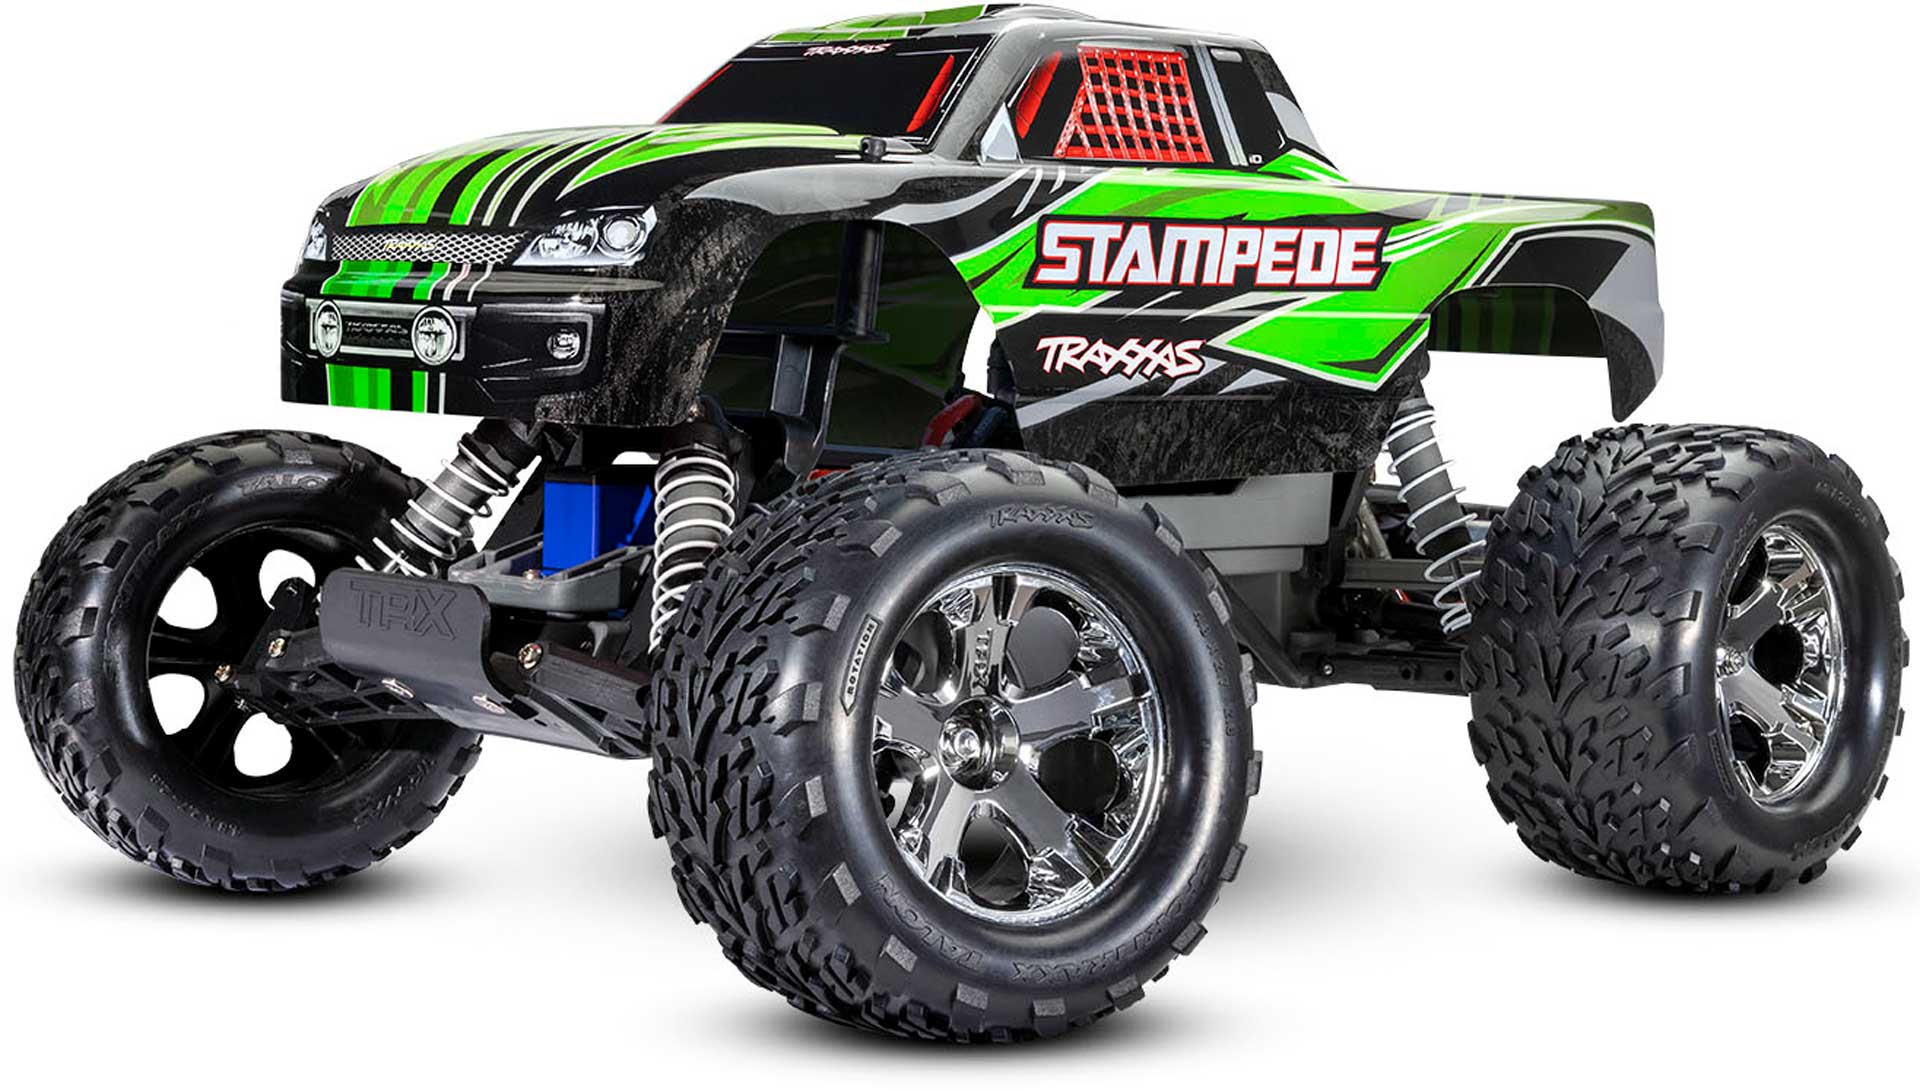 TRAXXAS STAMPEDE GREEN 1/10 2WD MONSTER-TRUCK RTR BRUSHED, WITH BATTERY AND 4 AMP USB-C CHARGER